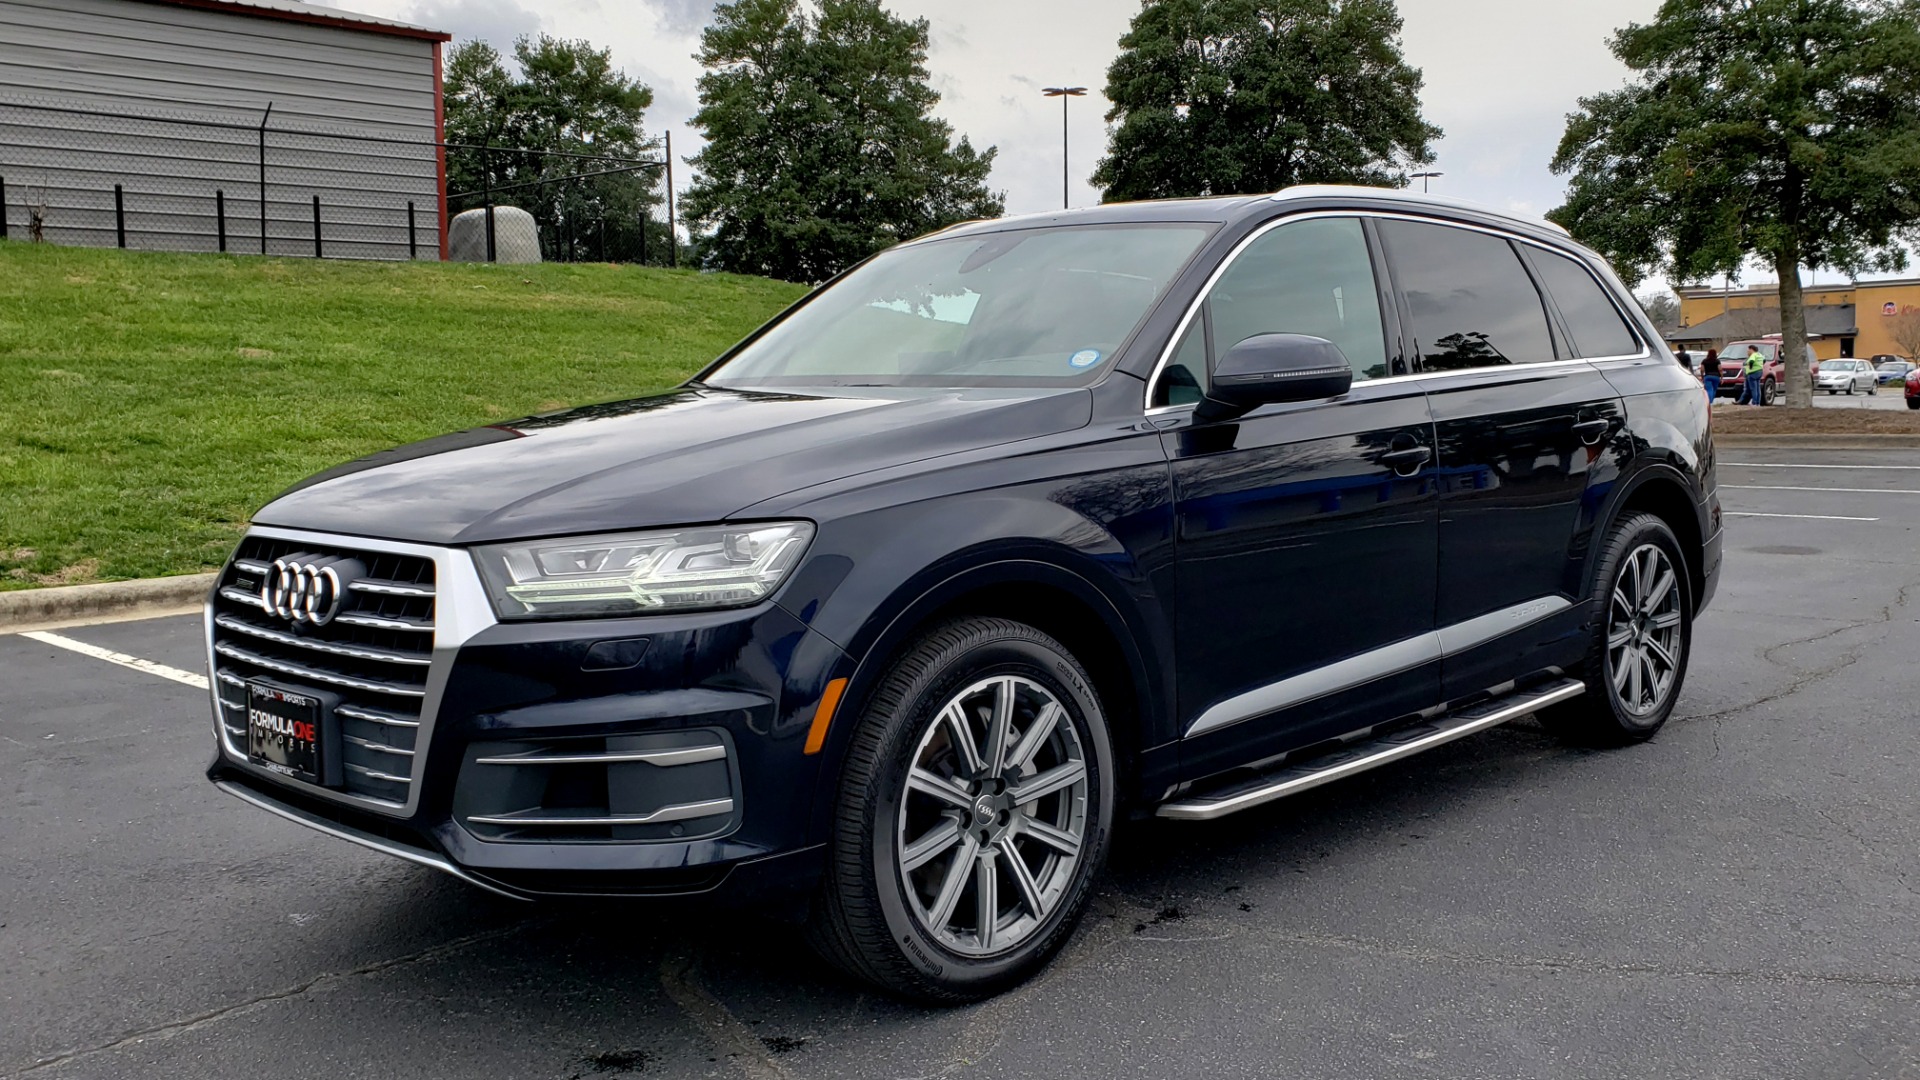 Used 2017 Audi Q7 PRESTIGE 3.0T / AWD / NAV / PANO-ROOF / HTD STS / BOSE / VISION for sale Sold at Formula Imports in Charlotte NC 28227 1